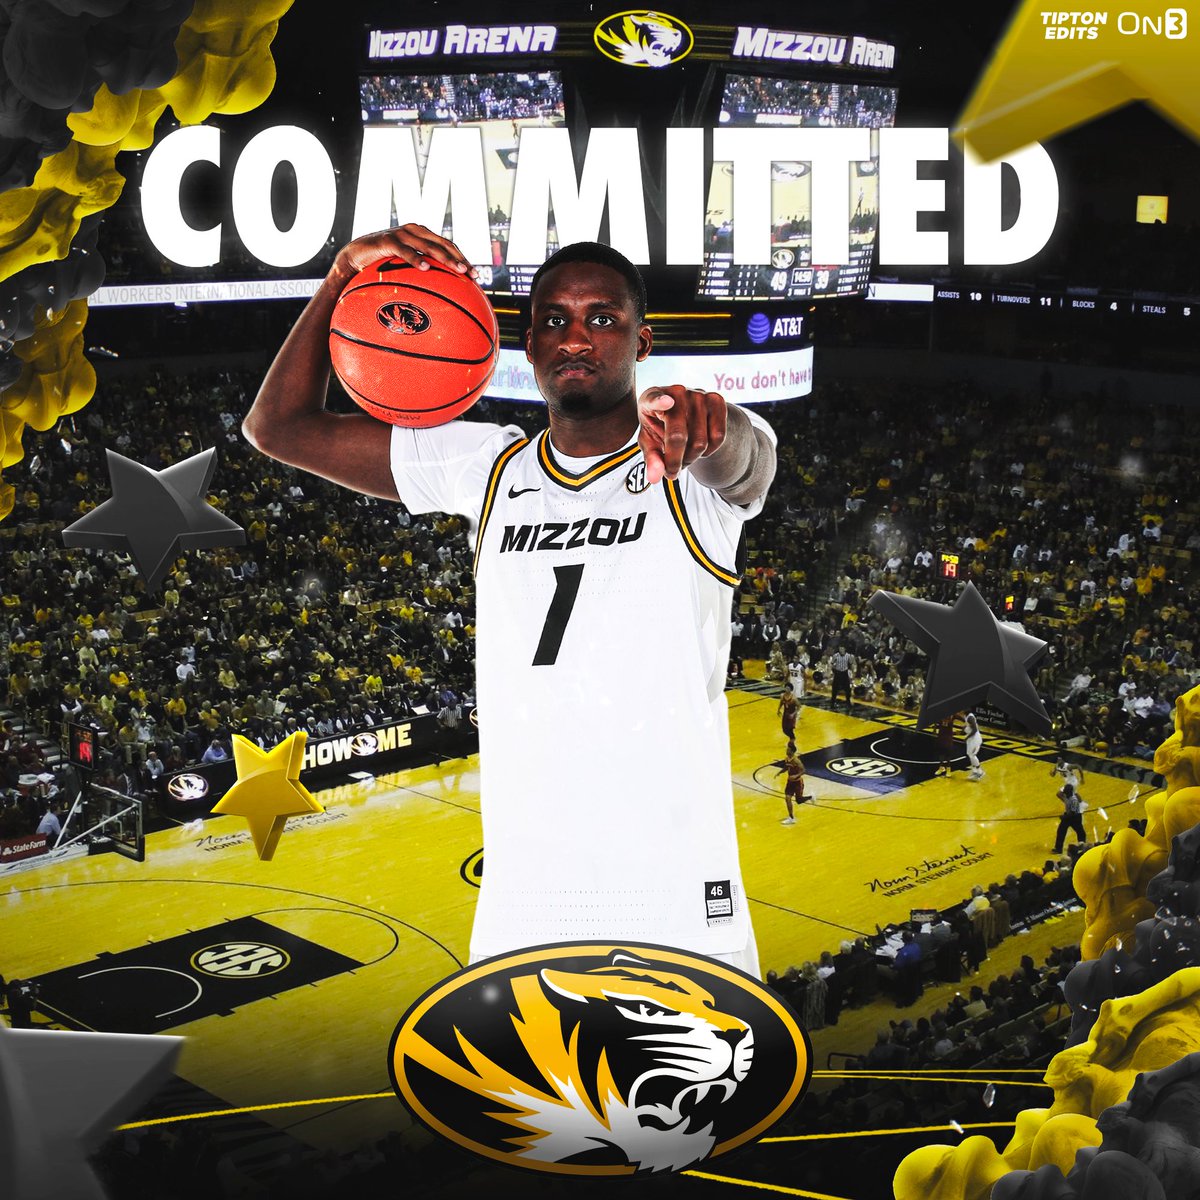 NEWS: Northern Kentucky transfer guard Marques Warrick has committed to Missouri, he tells @On3sports. The All-Horizon 1st Teamer averaged nearly 20 PPG this season. on3.com/college/missou…